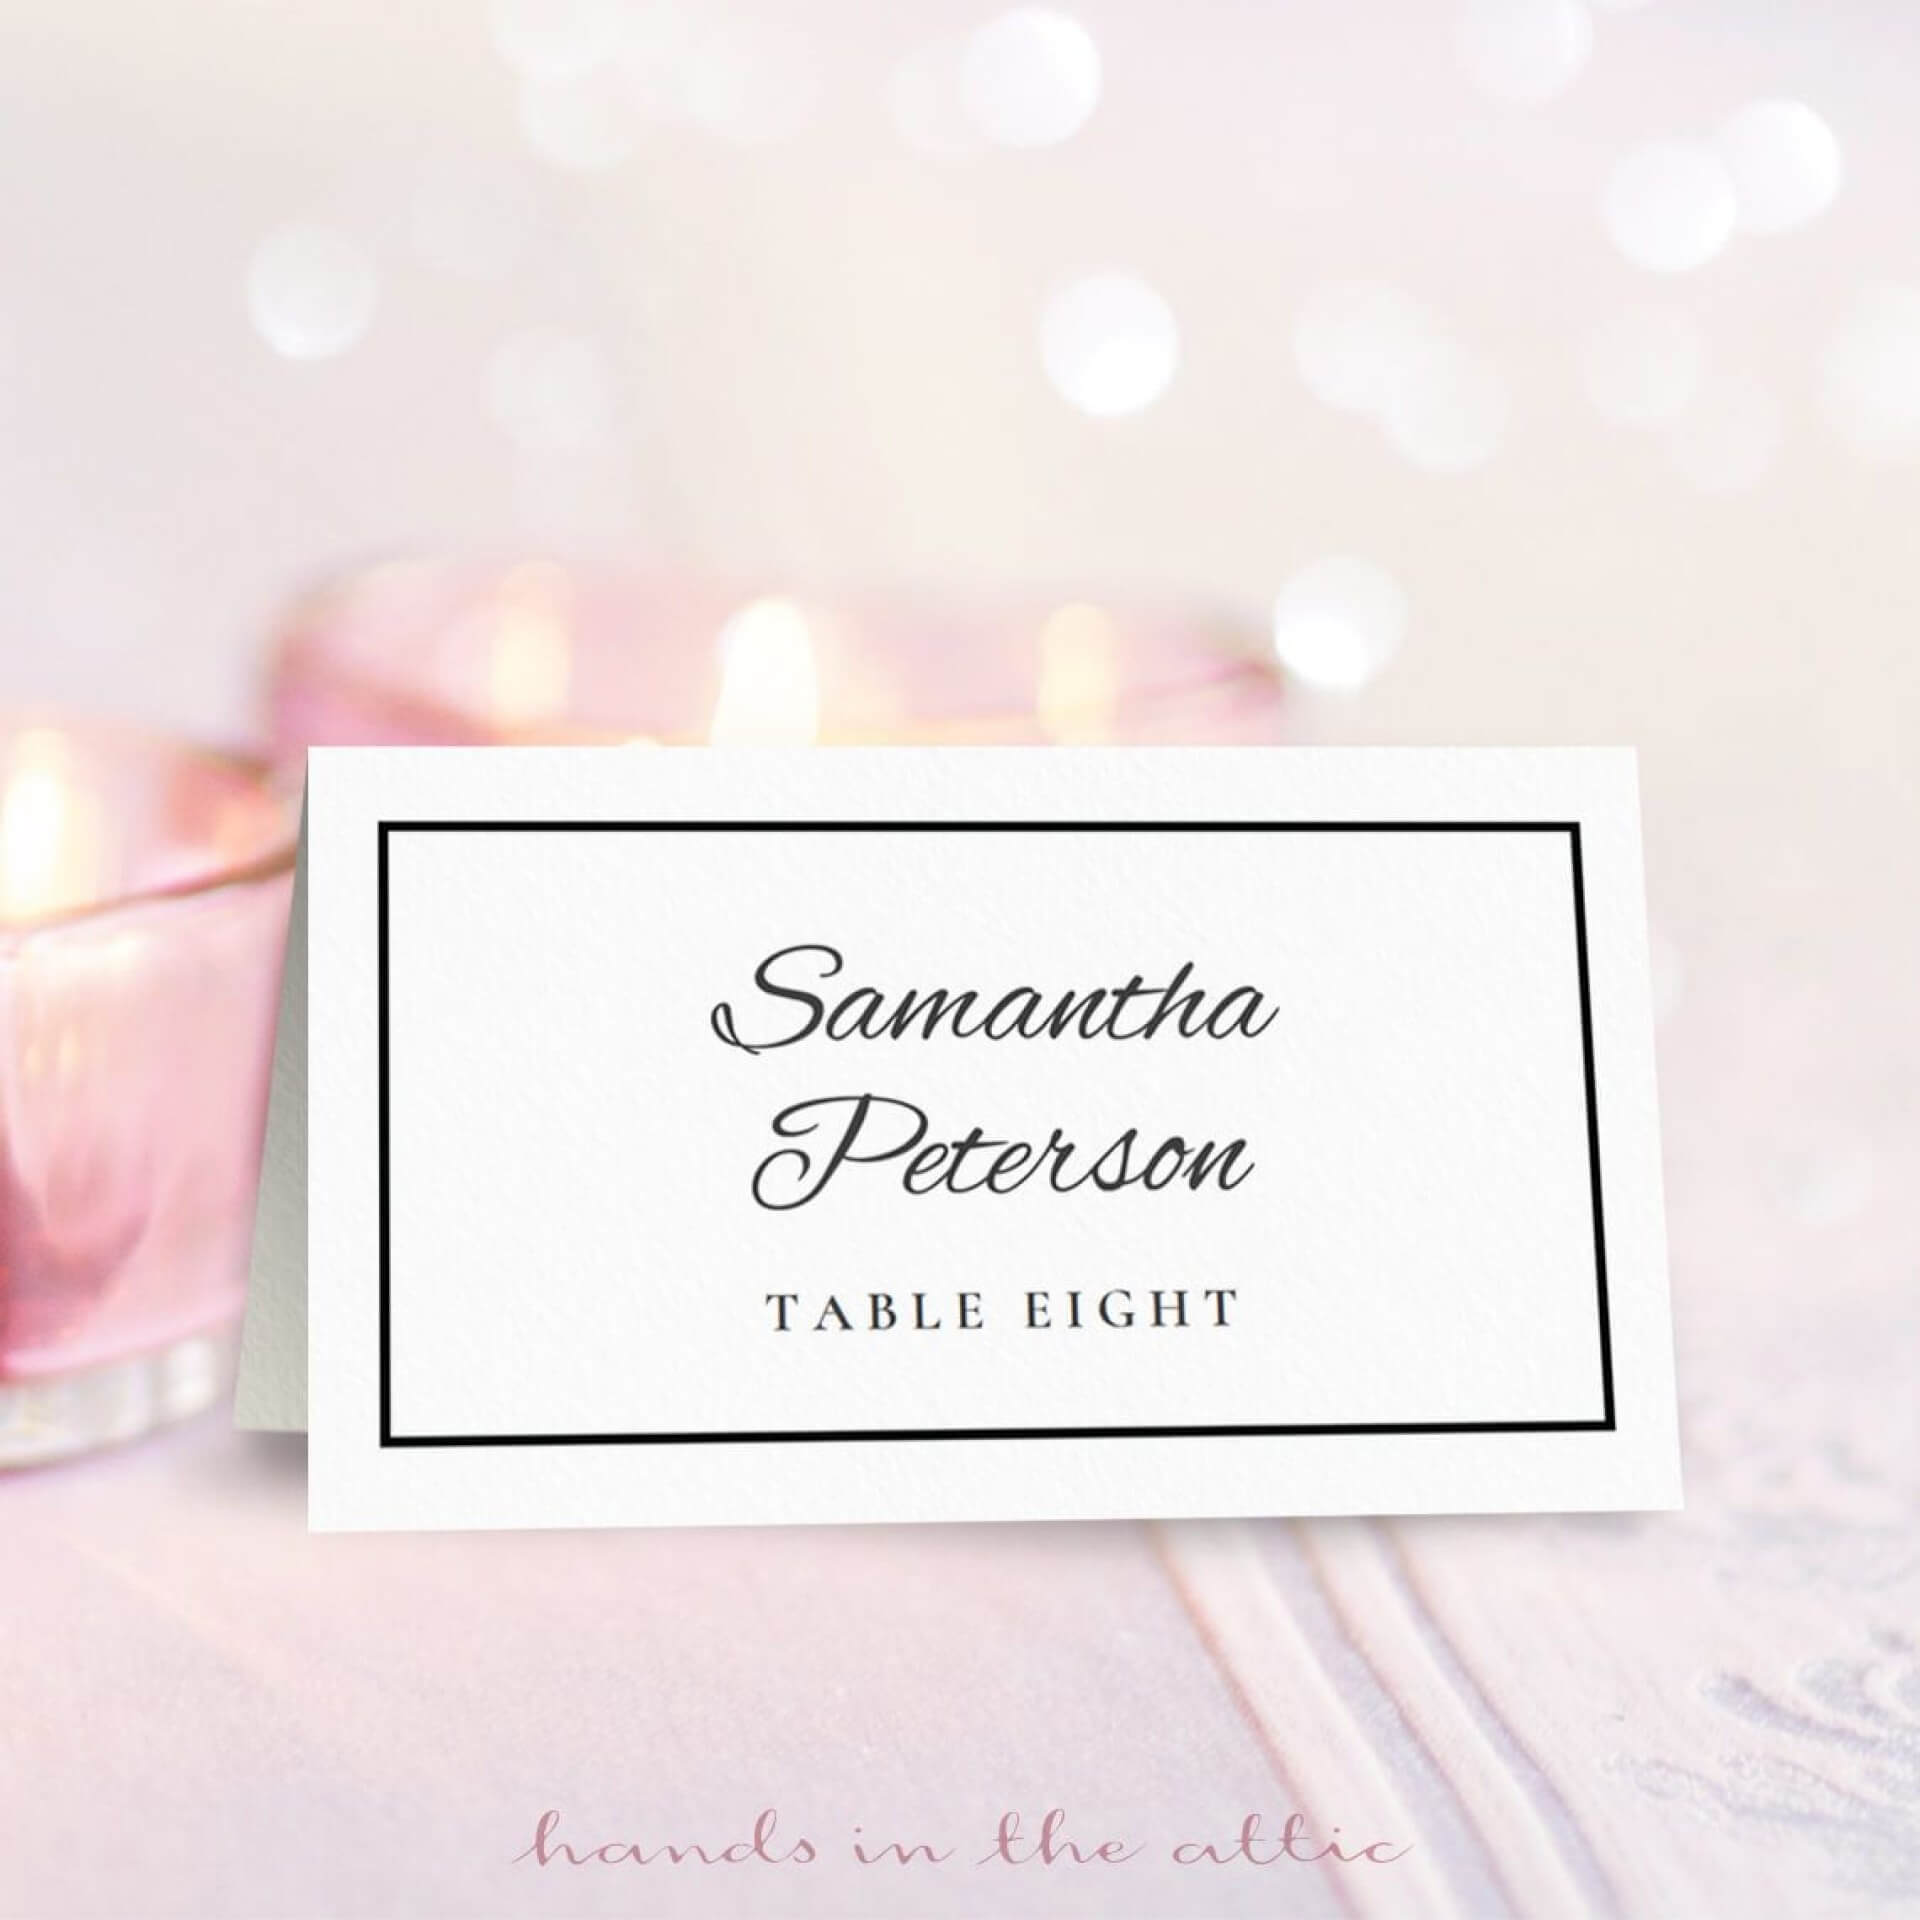 030 Template Ideas For Place Cards Word Amazing Download With Regard To Place Card Template Free 6 Per Page